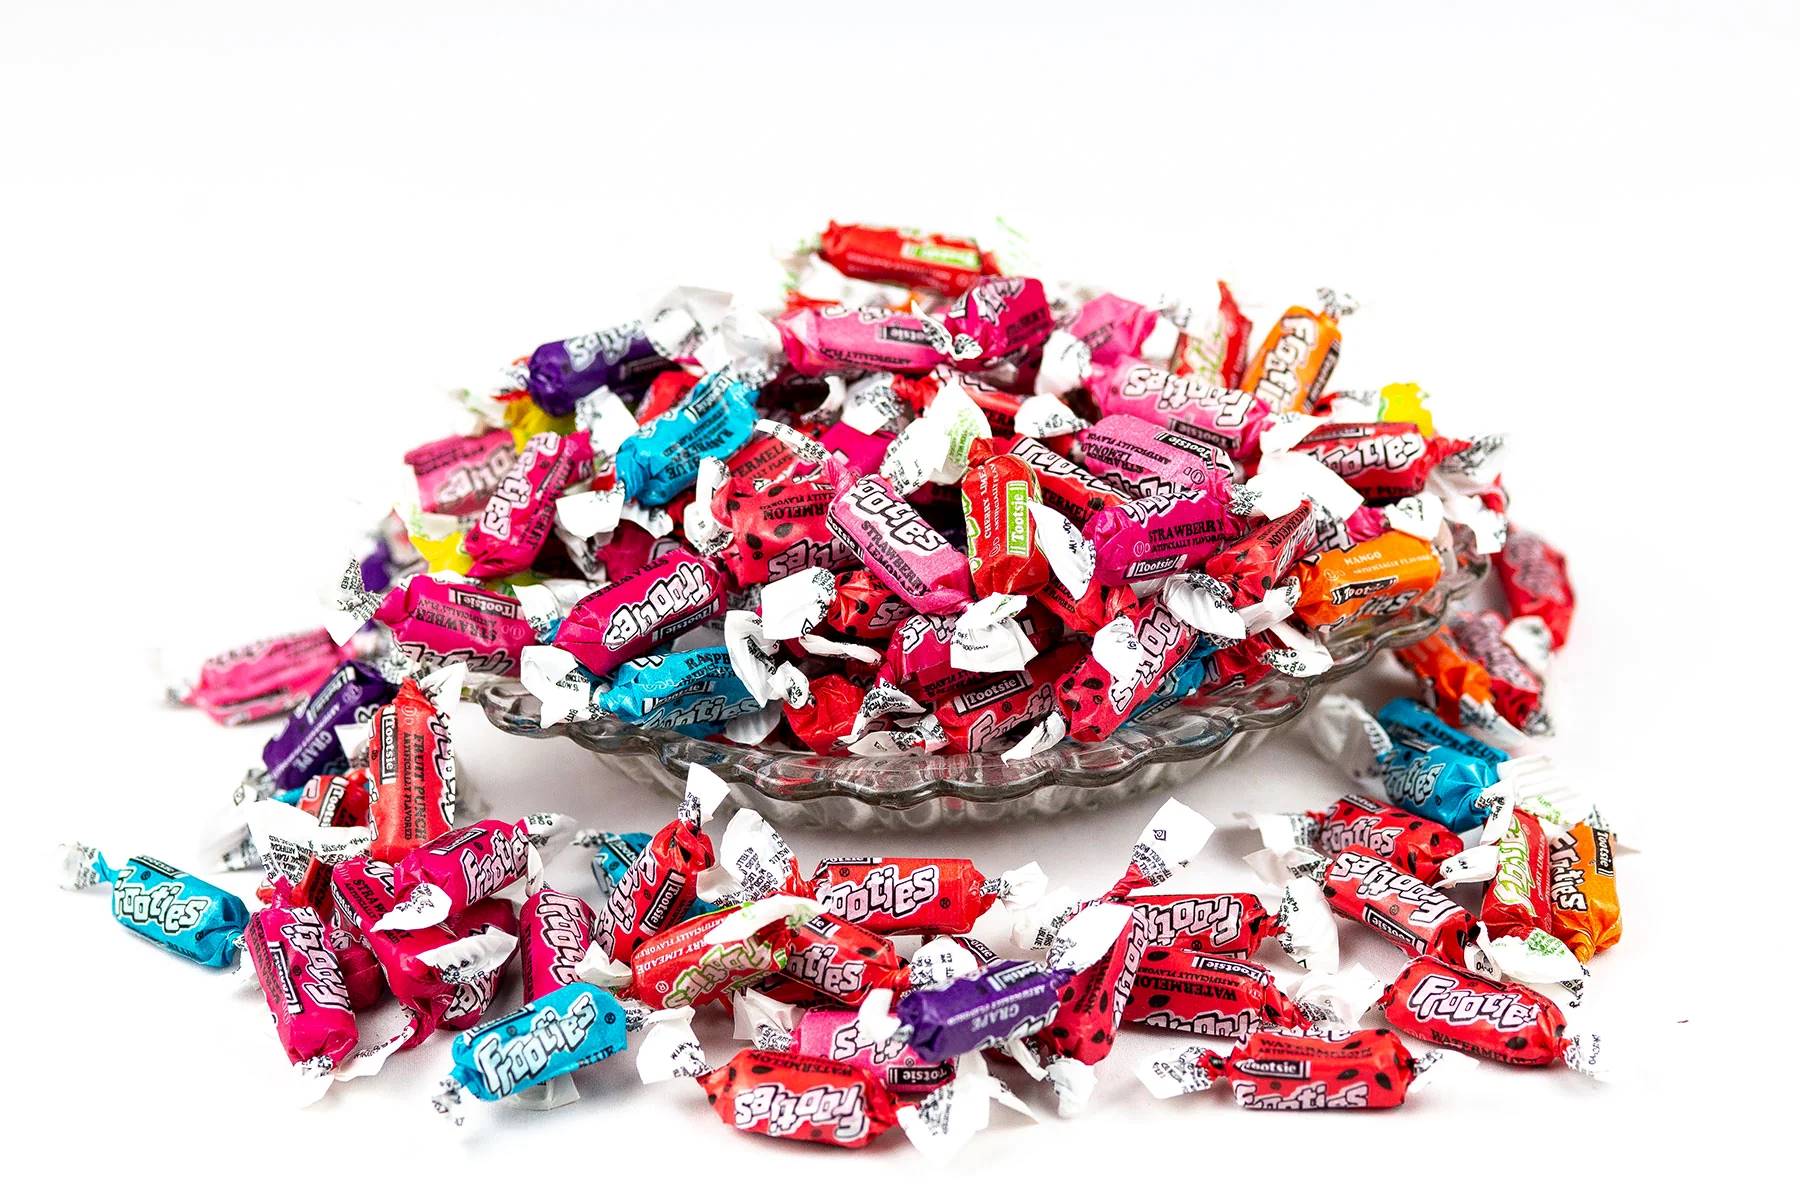 18-frooties-nutrition-facts